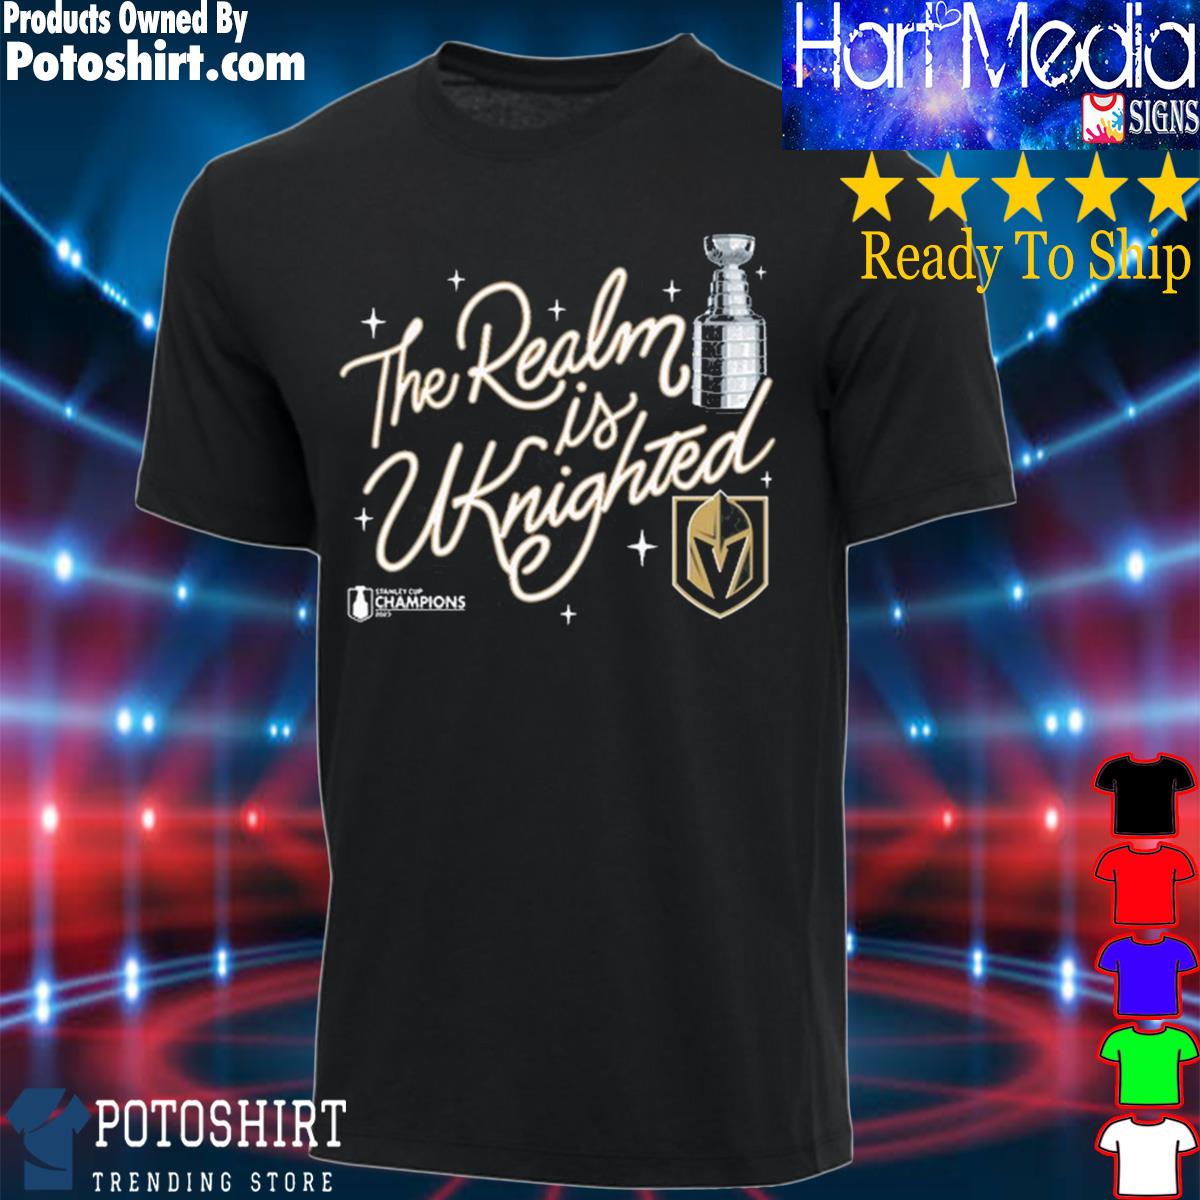 Women's Vegas Golden Knights Fanatics Branded Black 2023 Stanley Cup  Champions T-Shirt, hoodie, sweater and long sleeve